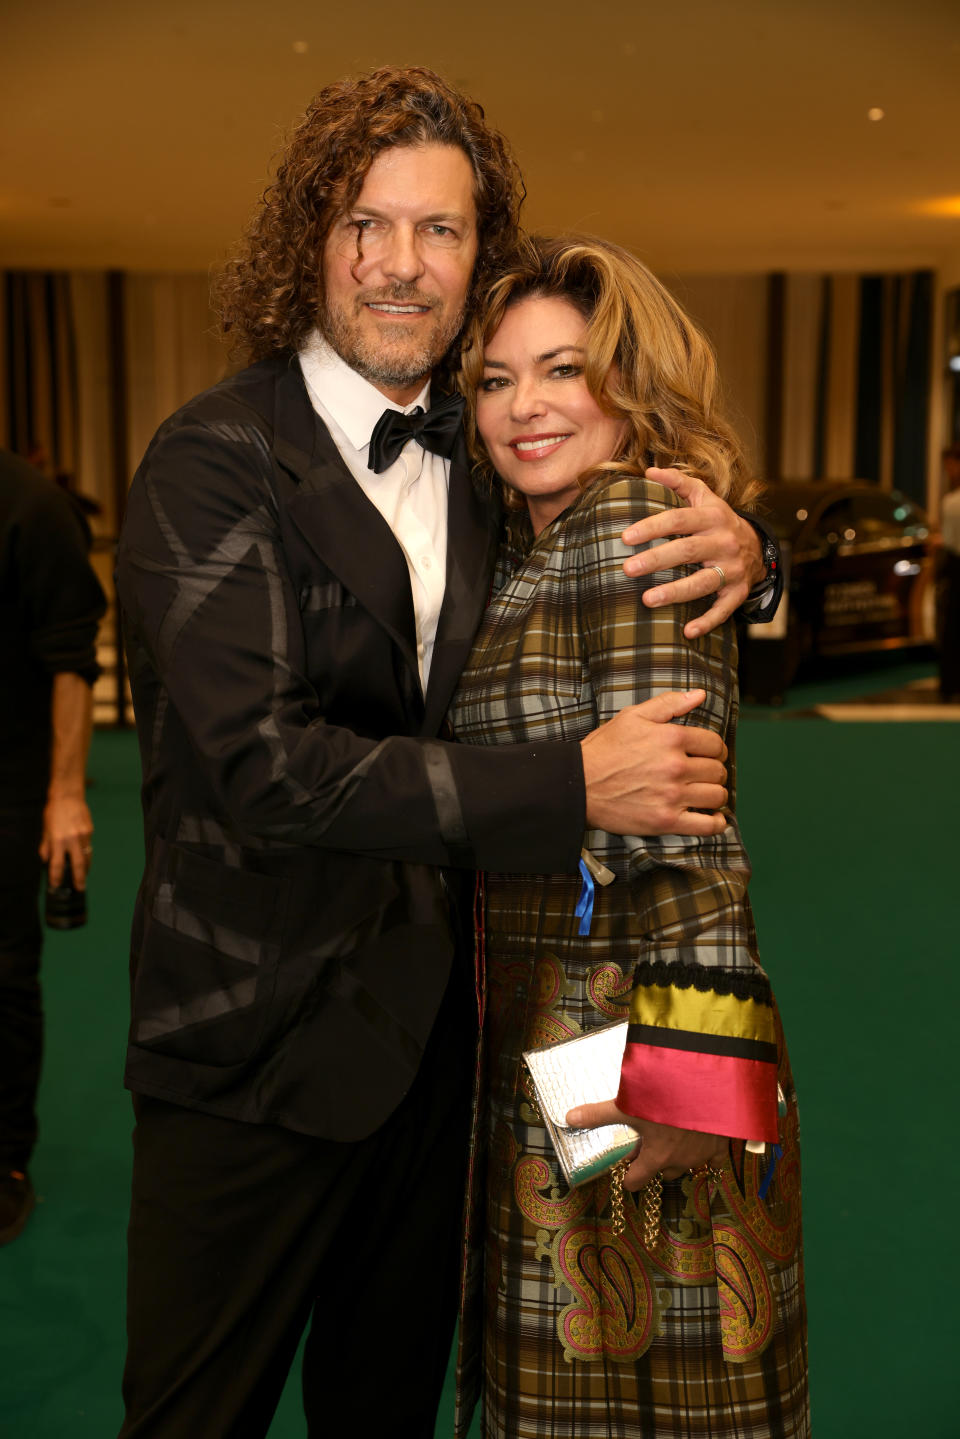 ZURICH, SWITZERLAND - SEPTEMBER 23:  Frederic Thiebaud and Shania Twain attend the Opening Night and premiere of 